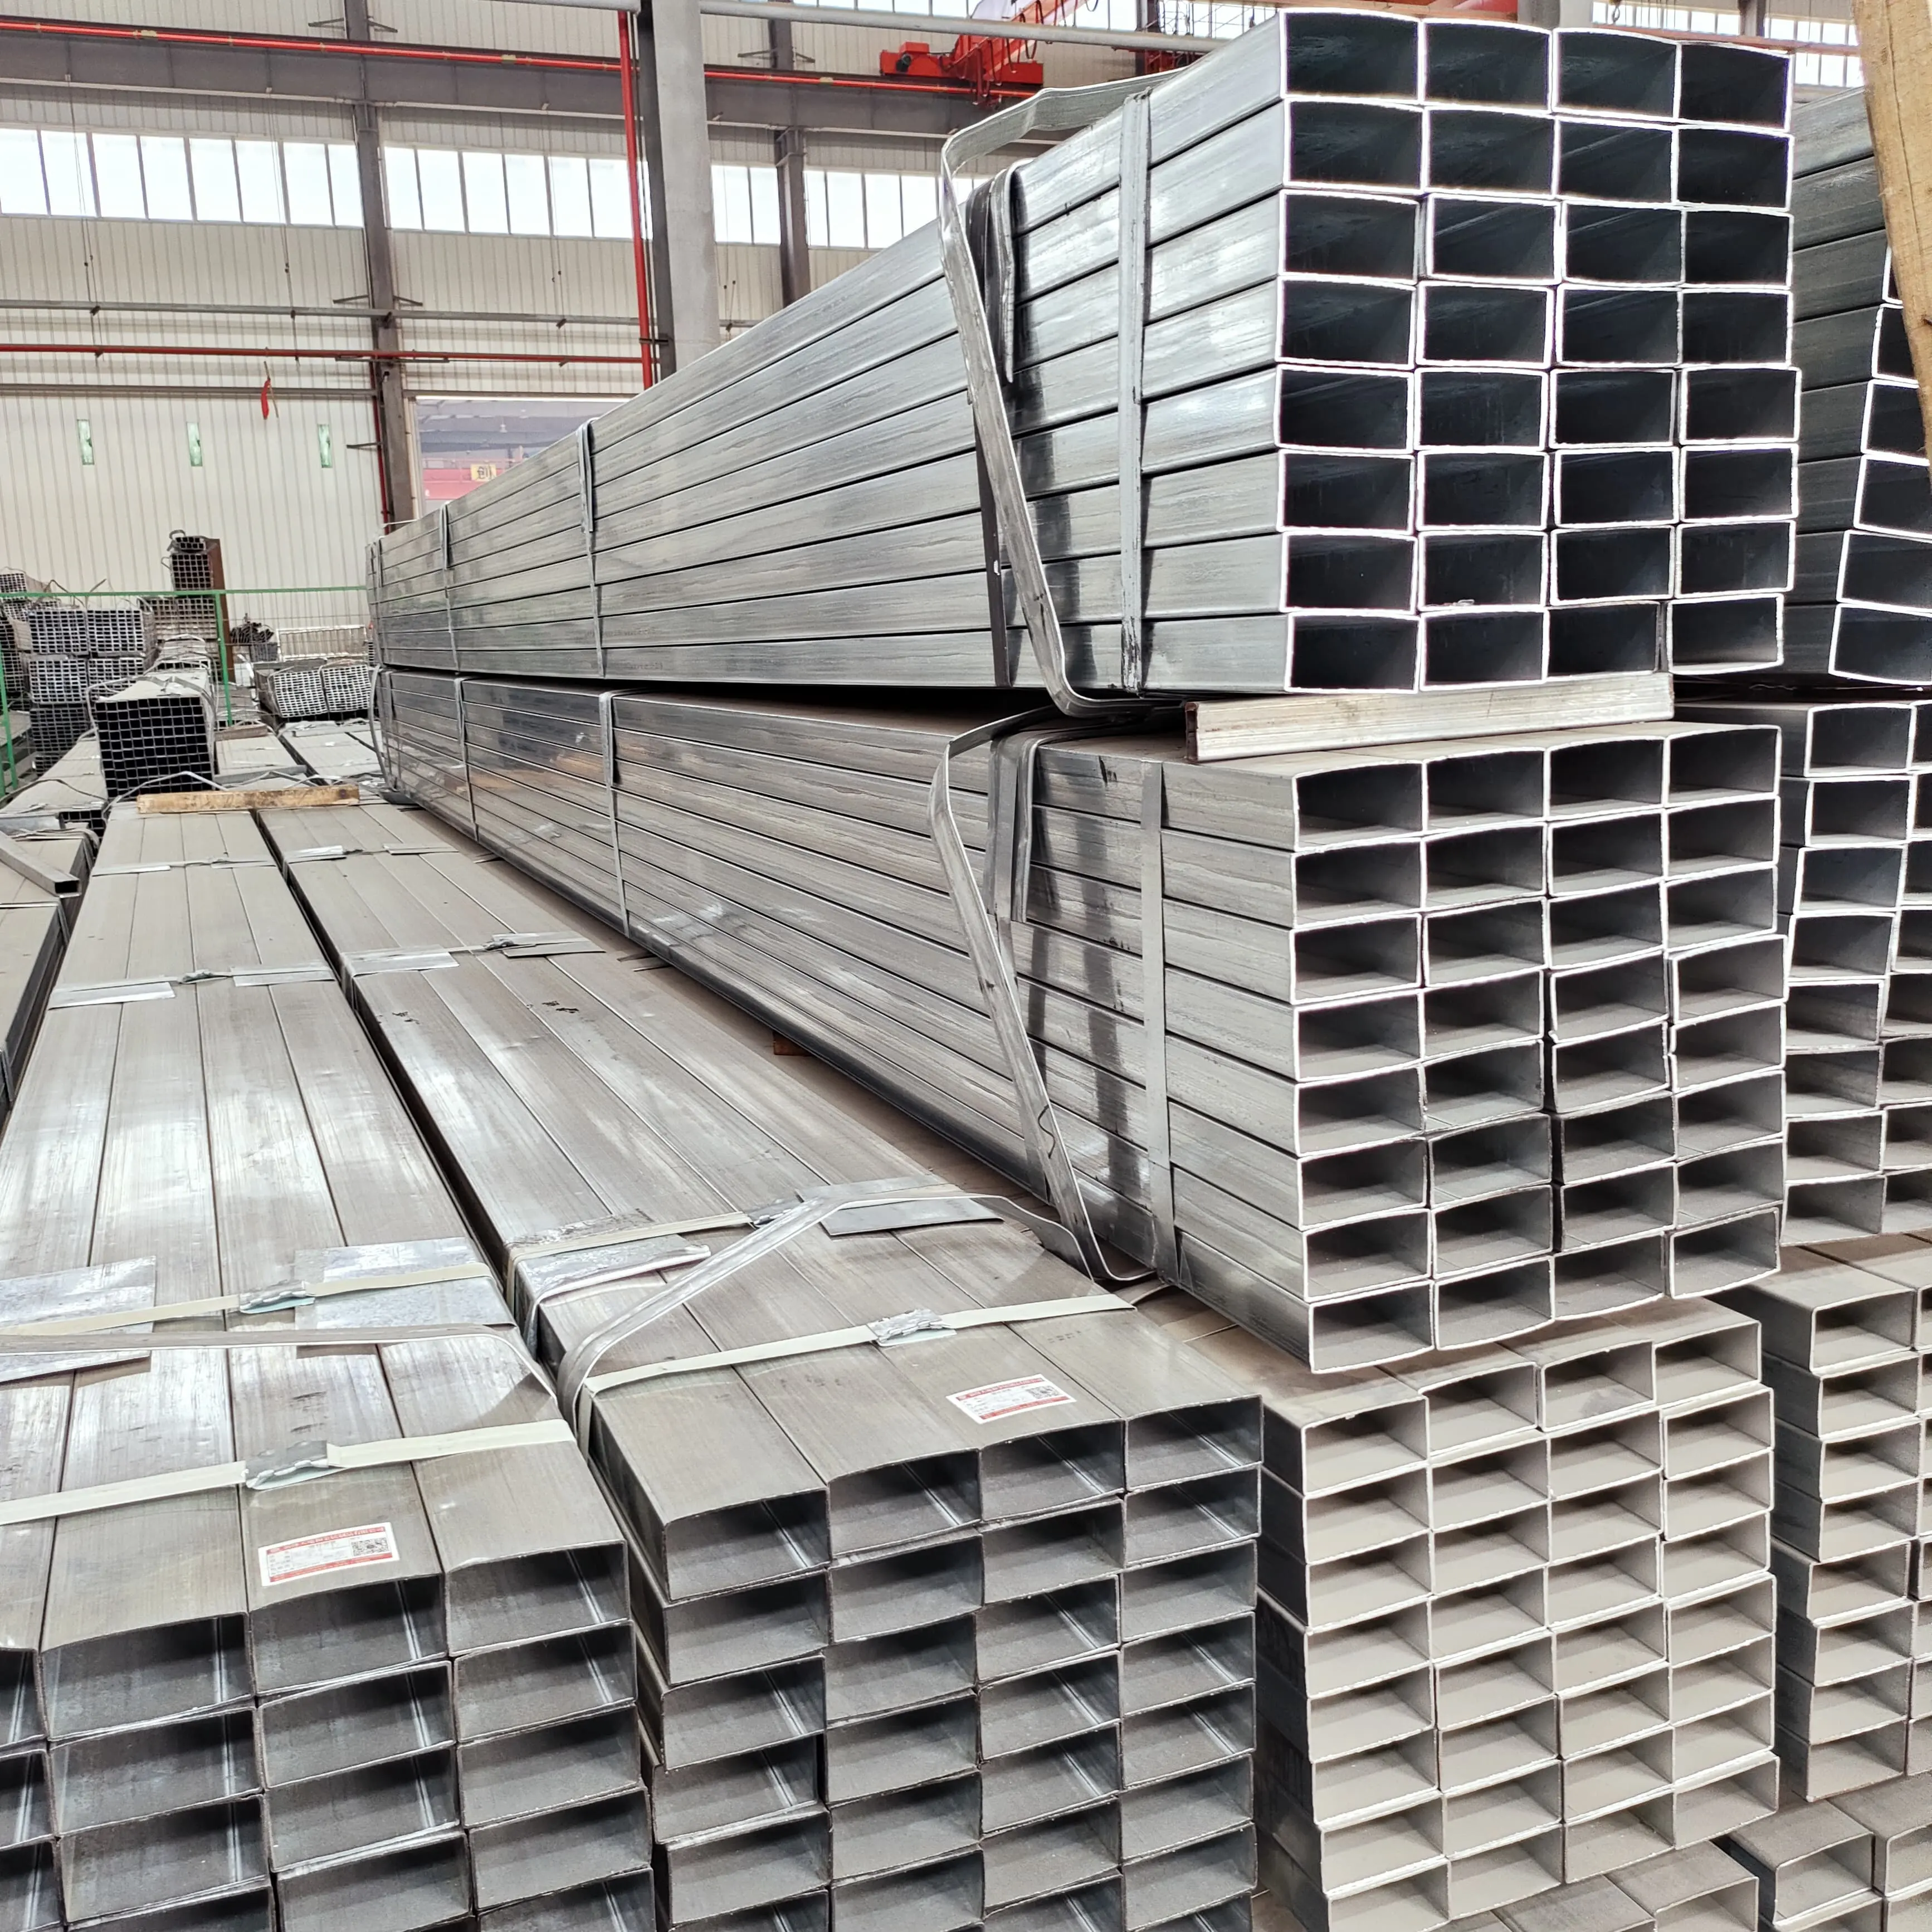 Construction structure galvanized steel S355 material specifications 30x30x3 mm steel square tube with holes in bundles